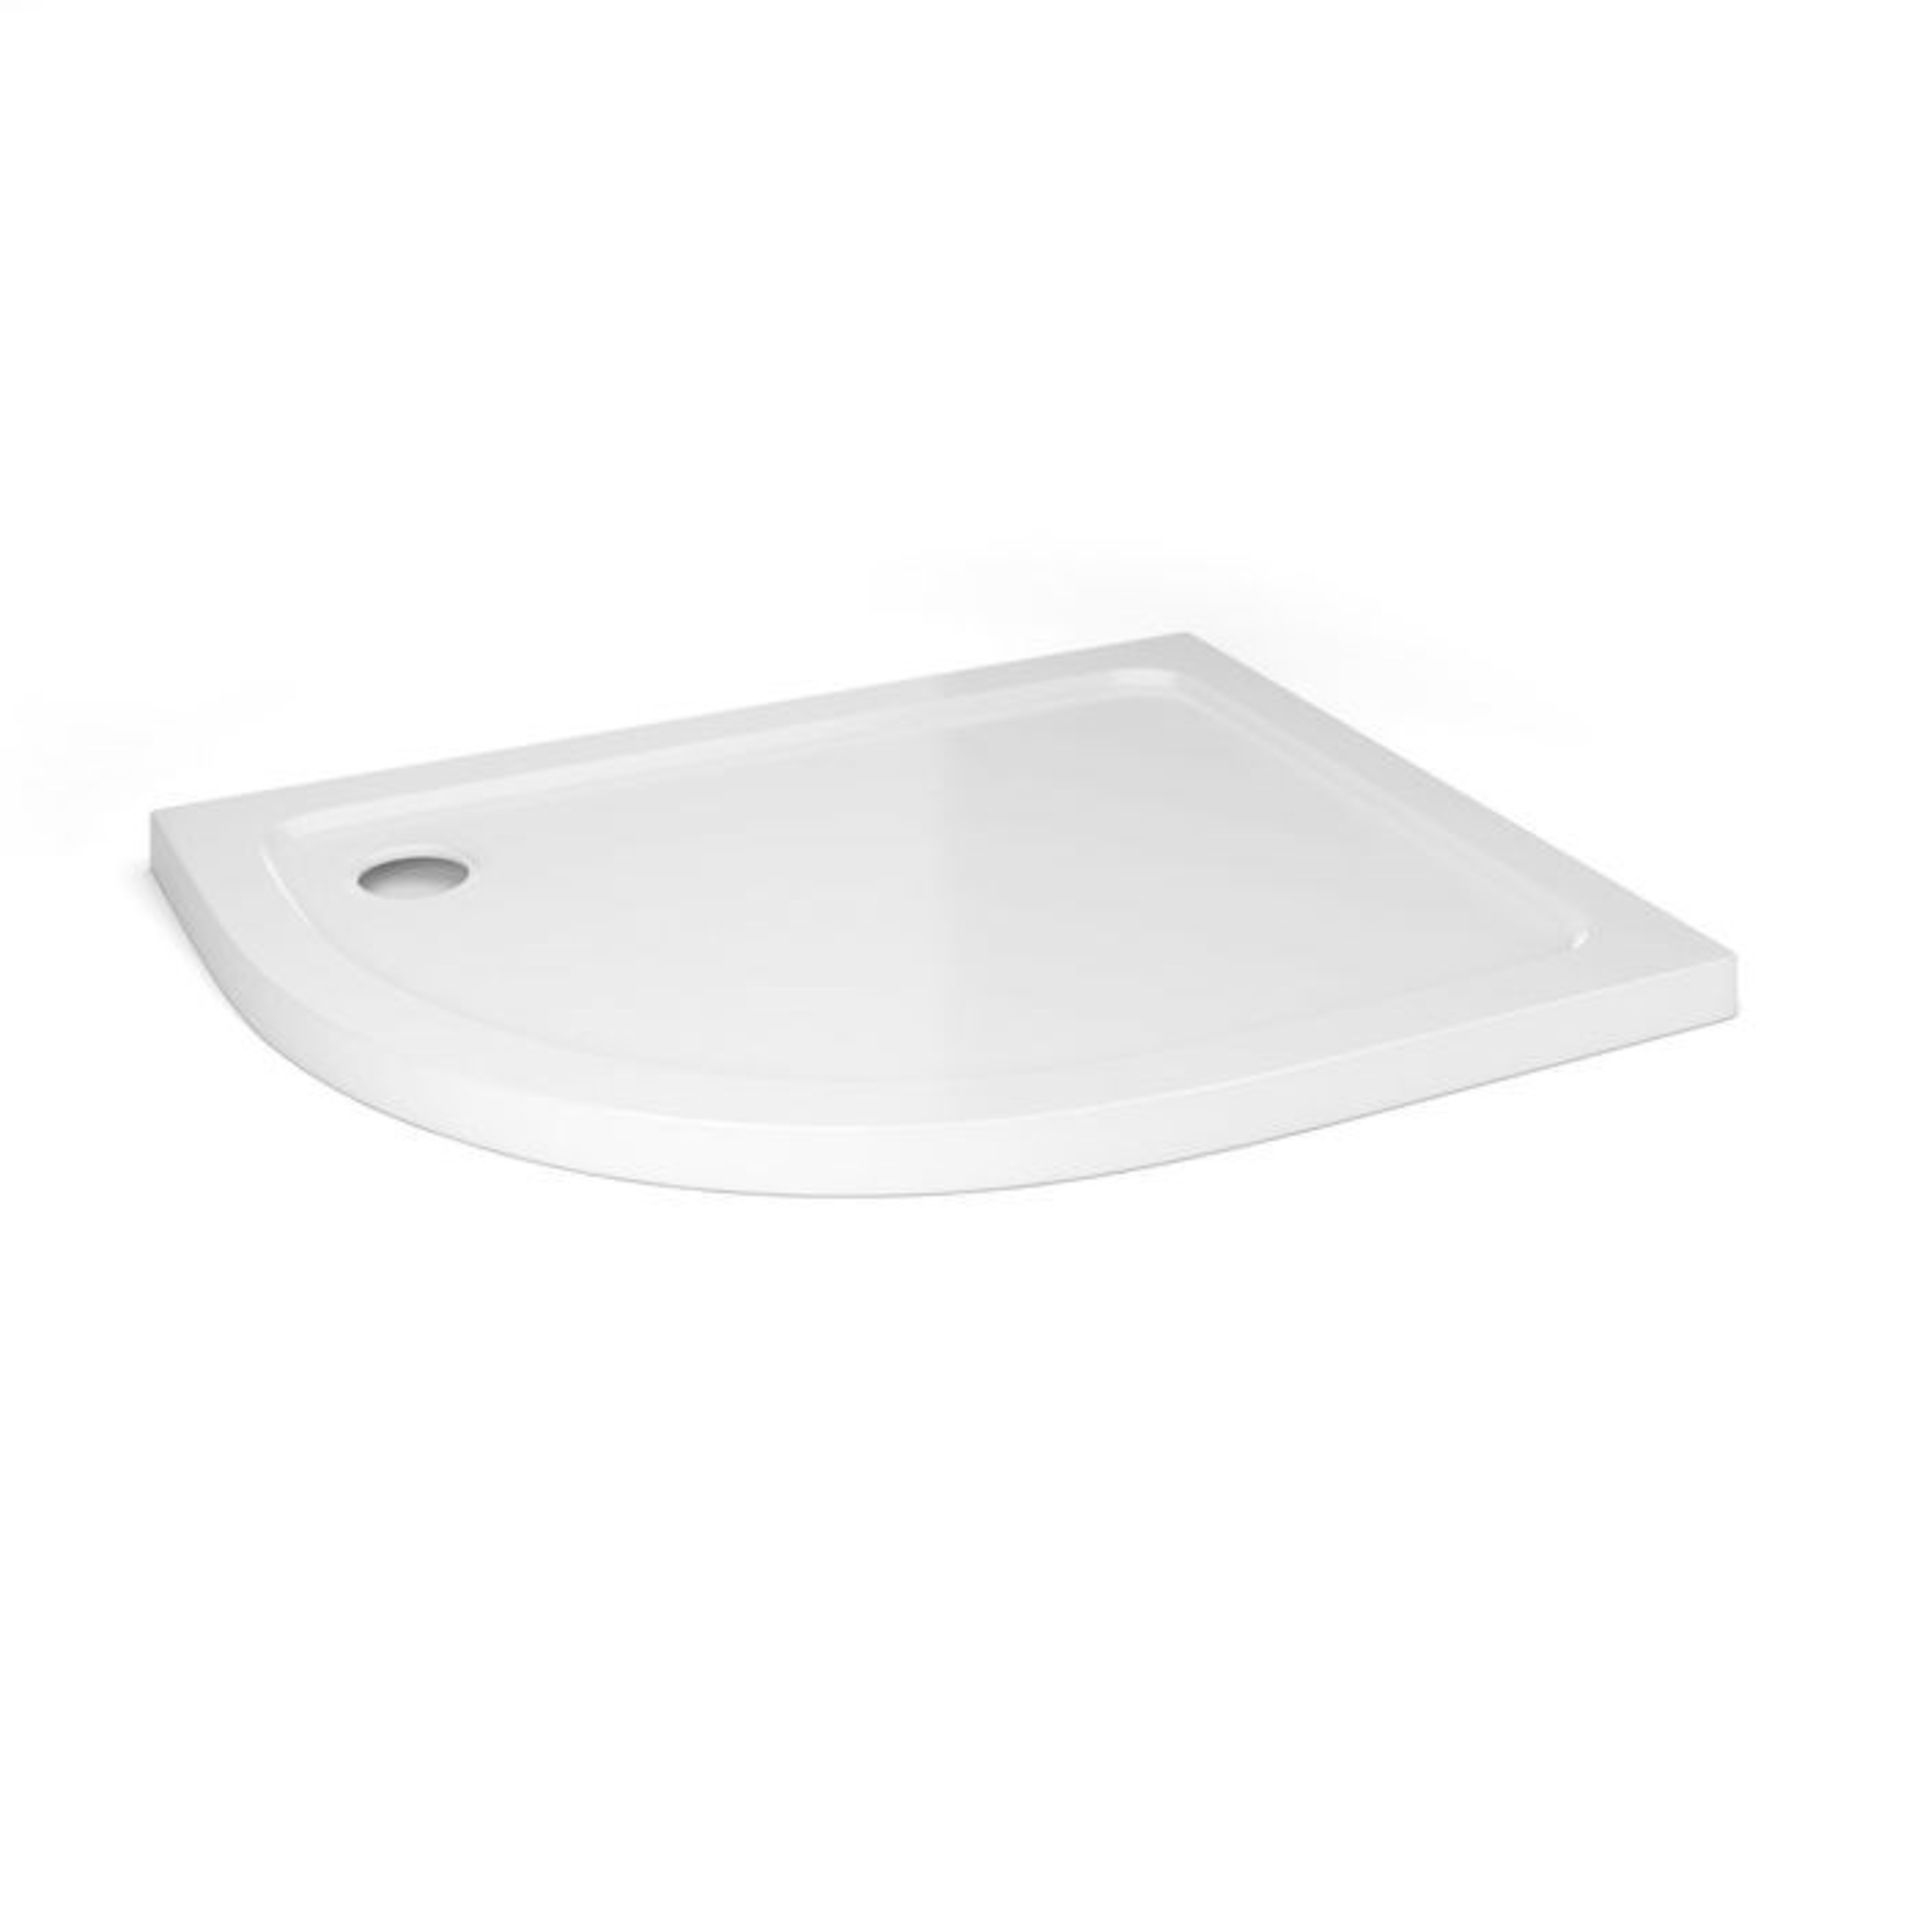 Brand New (A111) 1000x800mm Offset Quadrant Ultra Slim Stone Shower Tray - Left.Constructed from acr - Image 2 of 2